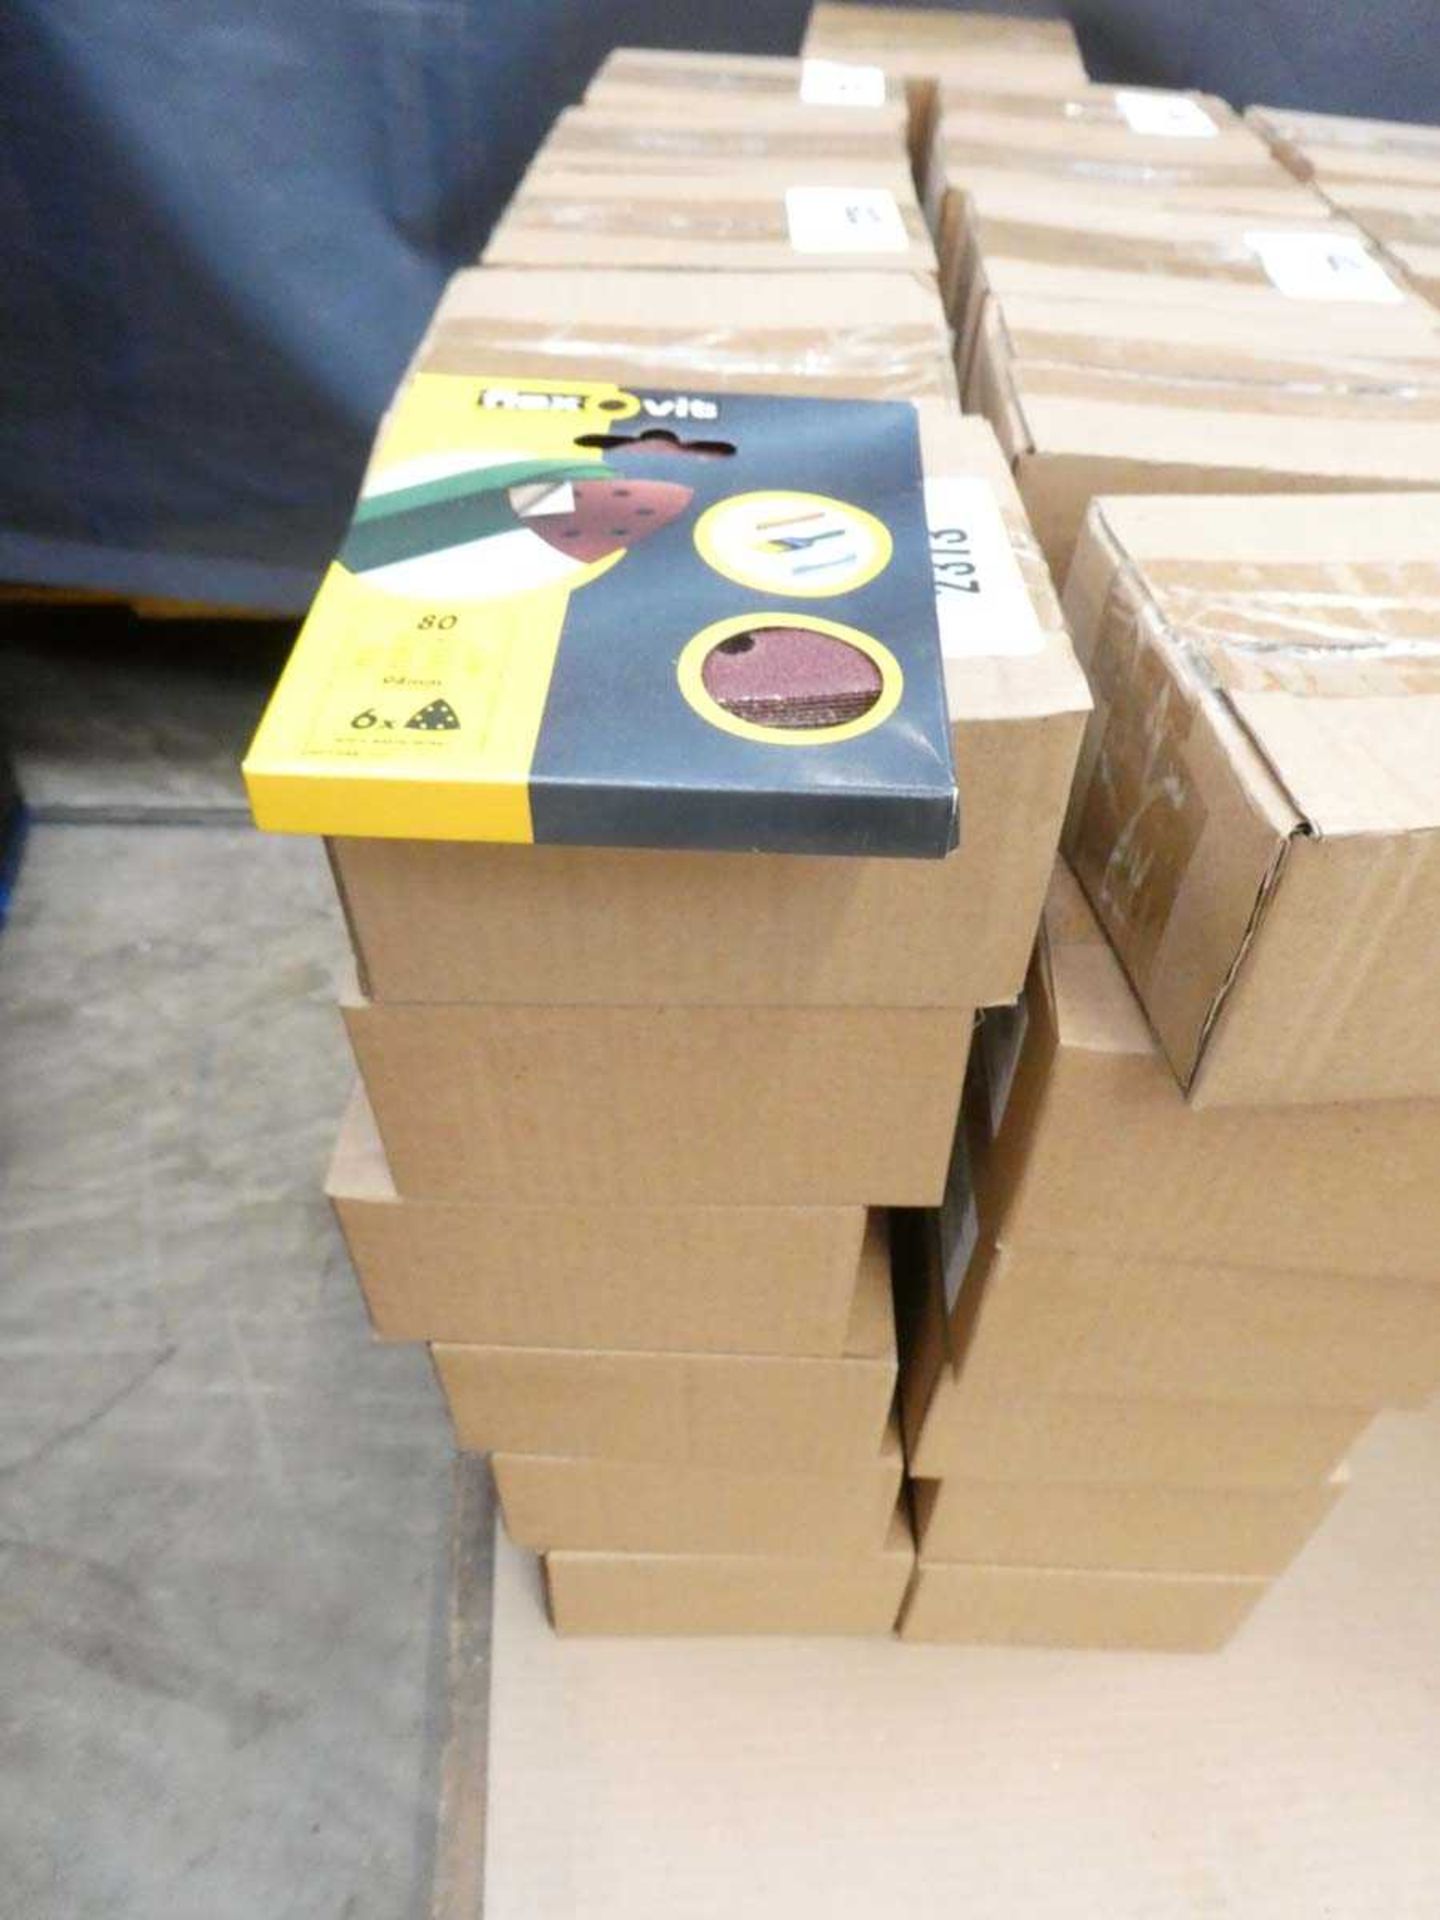 12 boxes containing 5 packs of 6 (each box) of Alox 94x94x94mm sandpaper